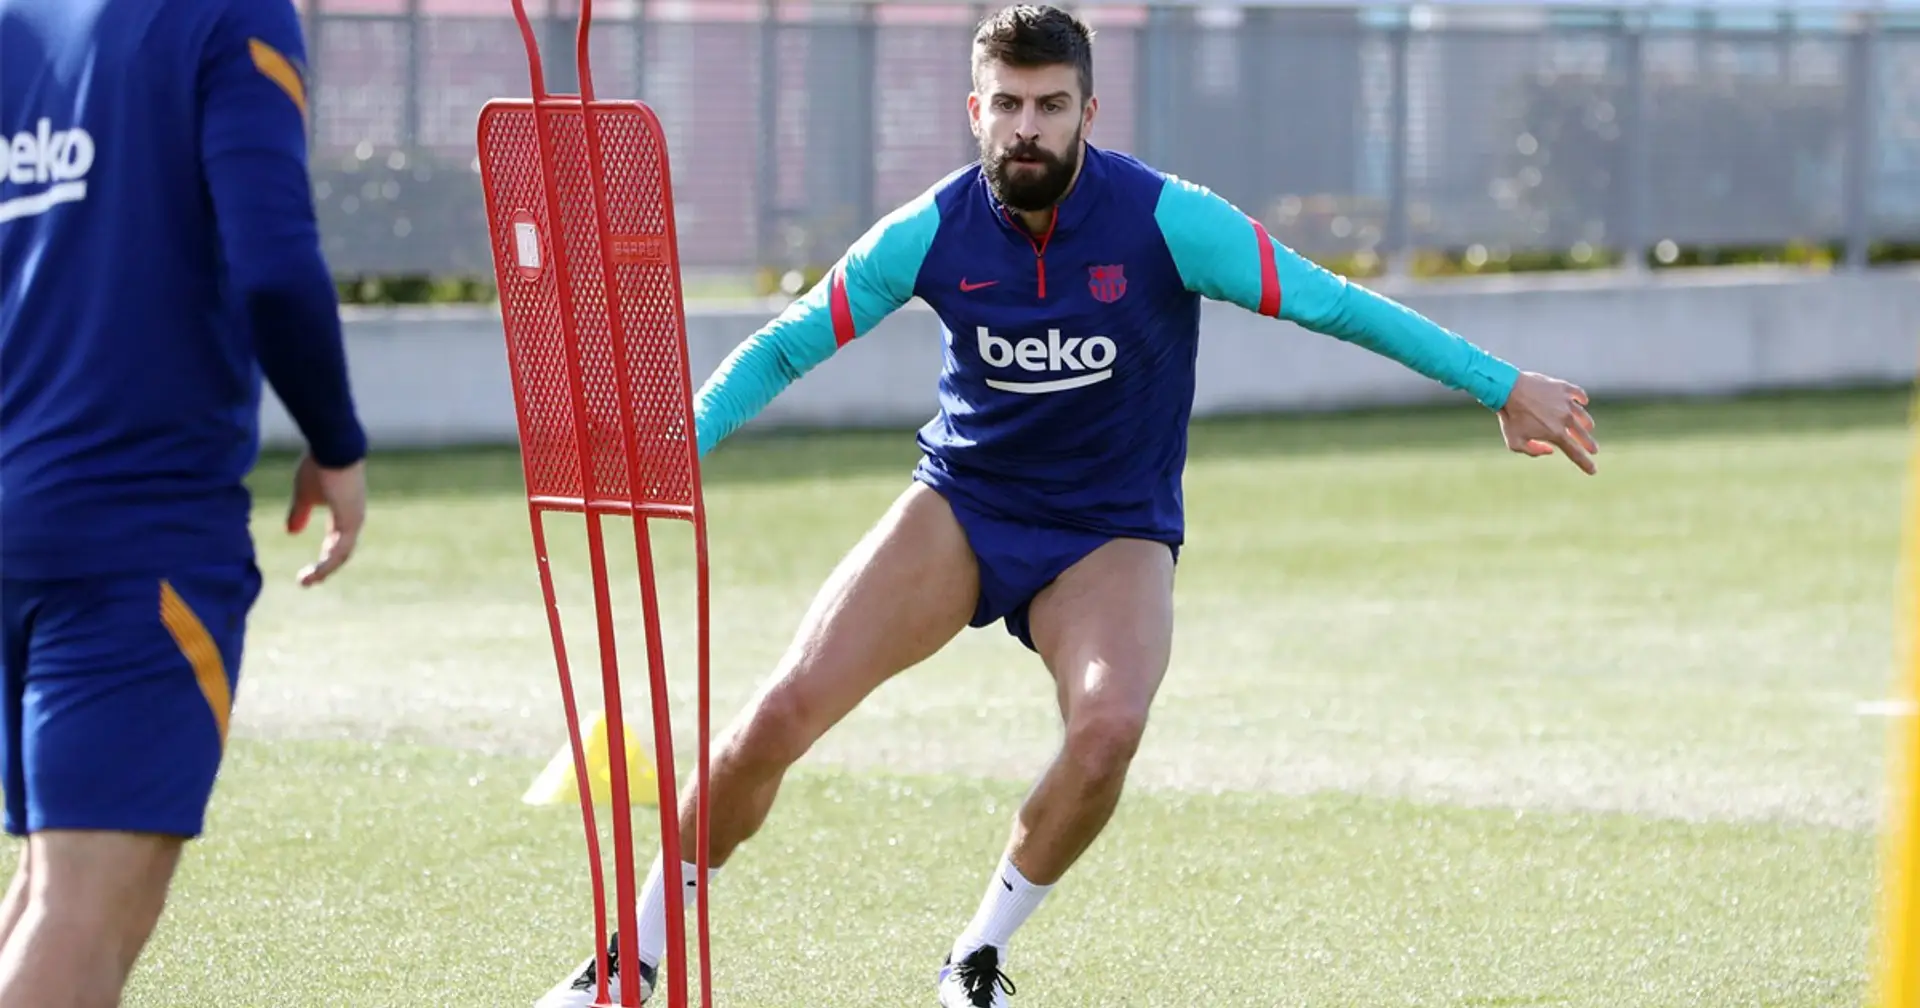 Gerard Pique trains on Wednesday despite day off as he aims to feature against Real Madrid